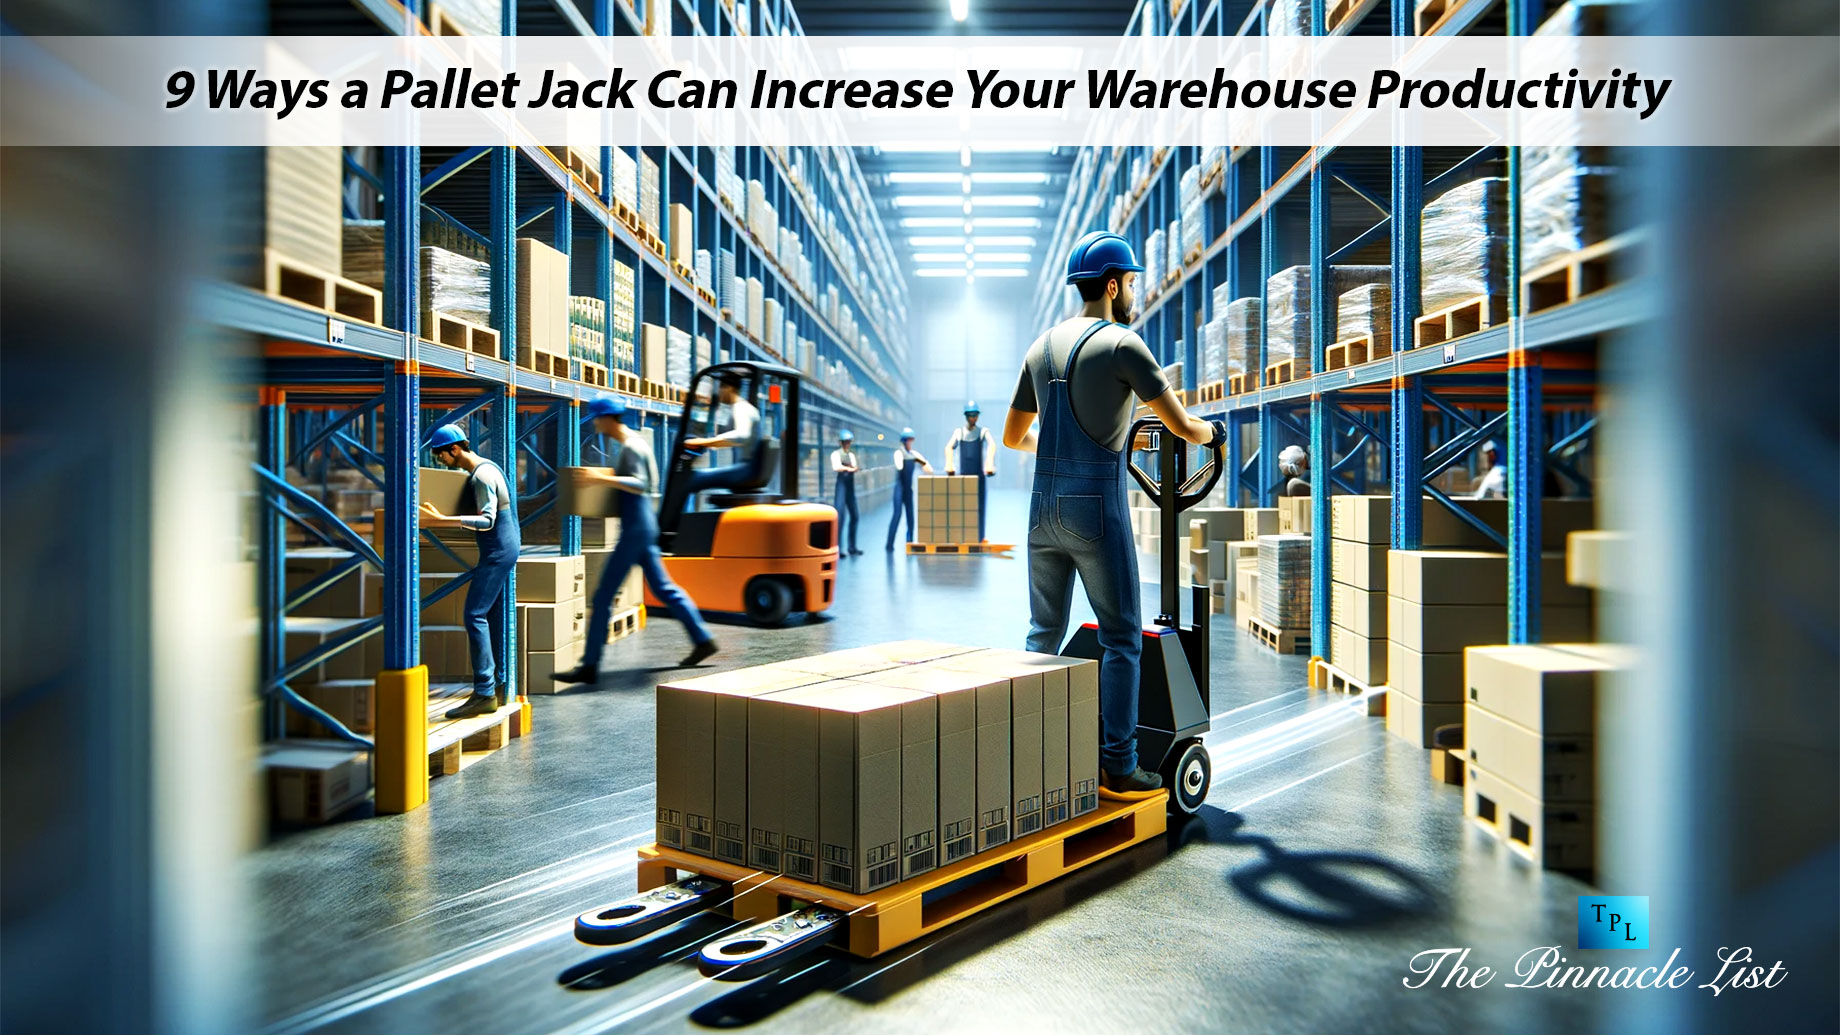 9 Ways a Pallet Jack Can Increase Your Warehouse Productivity